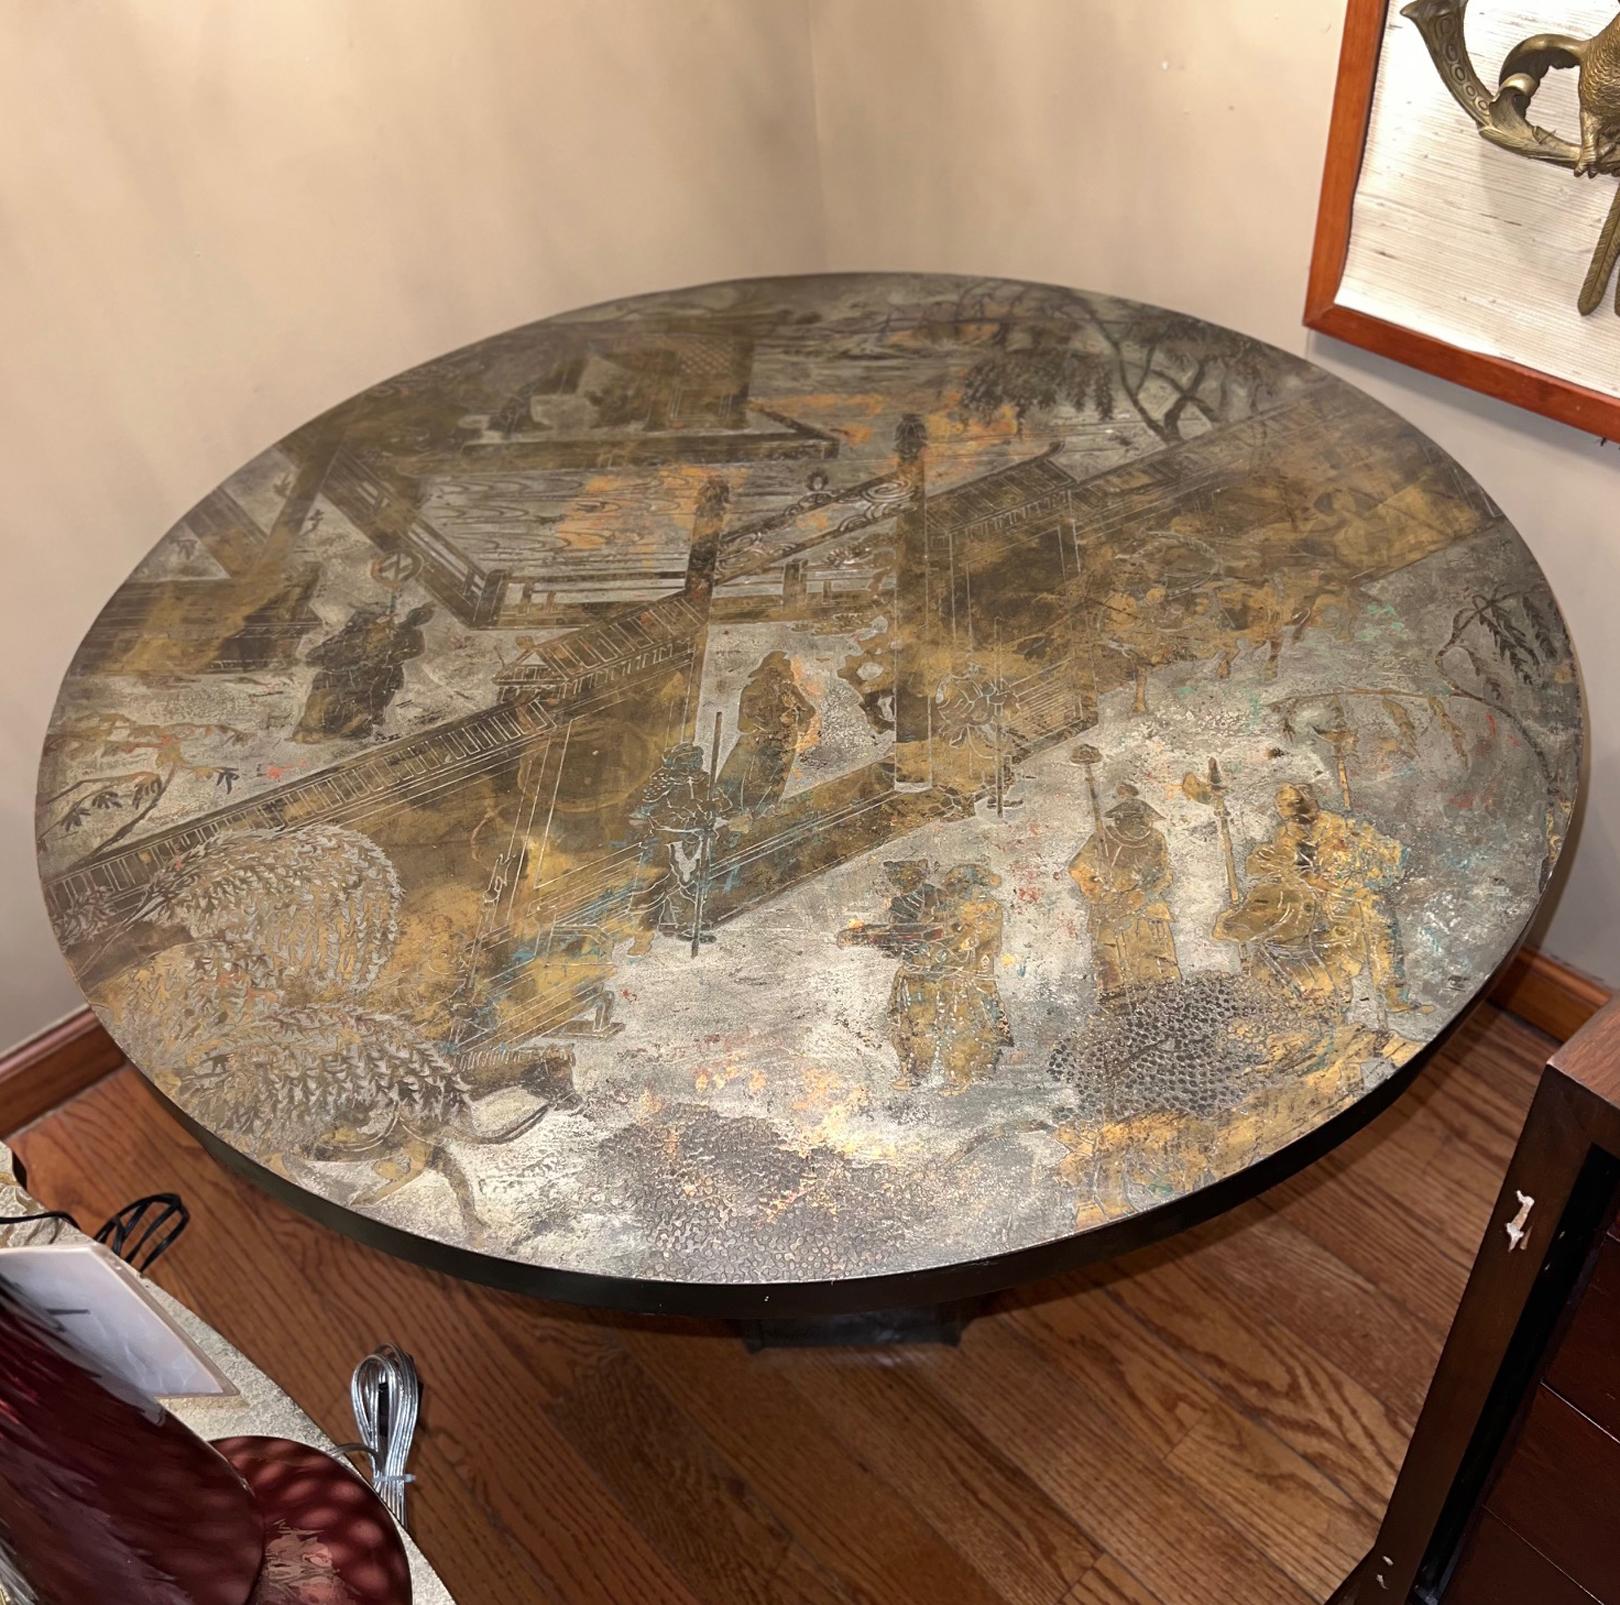 An etched and patinated circa 1960's coffee table by Phillip and Kevin LaVerne.

Measurements:
Height 25